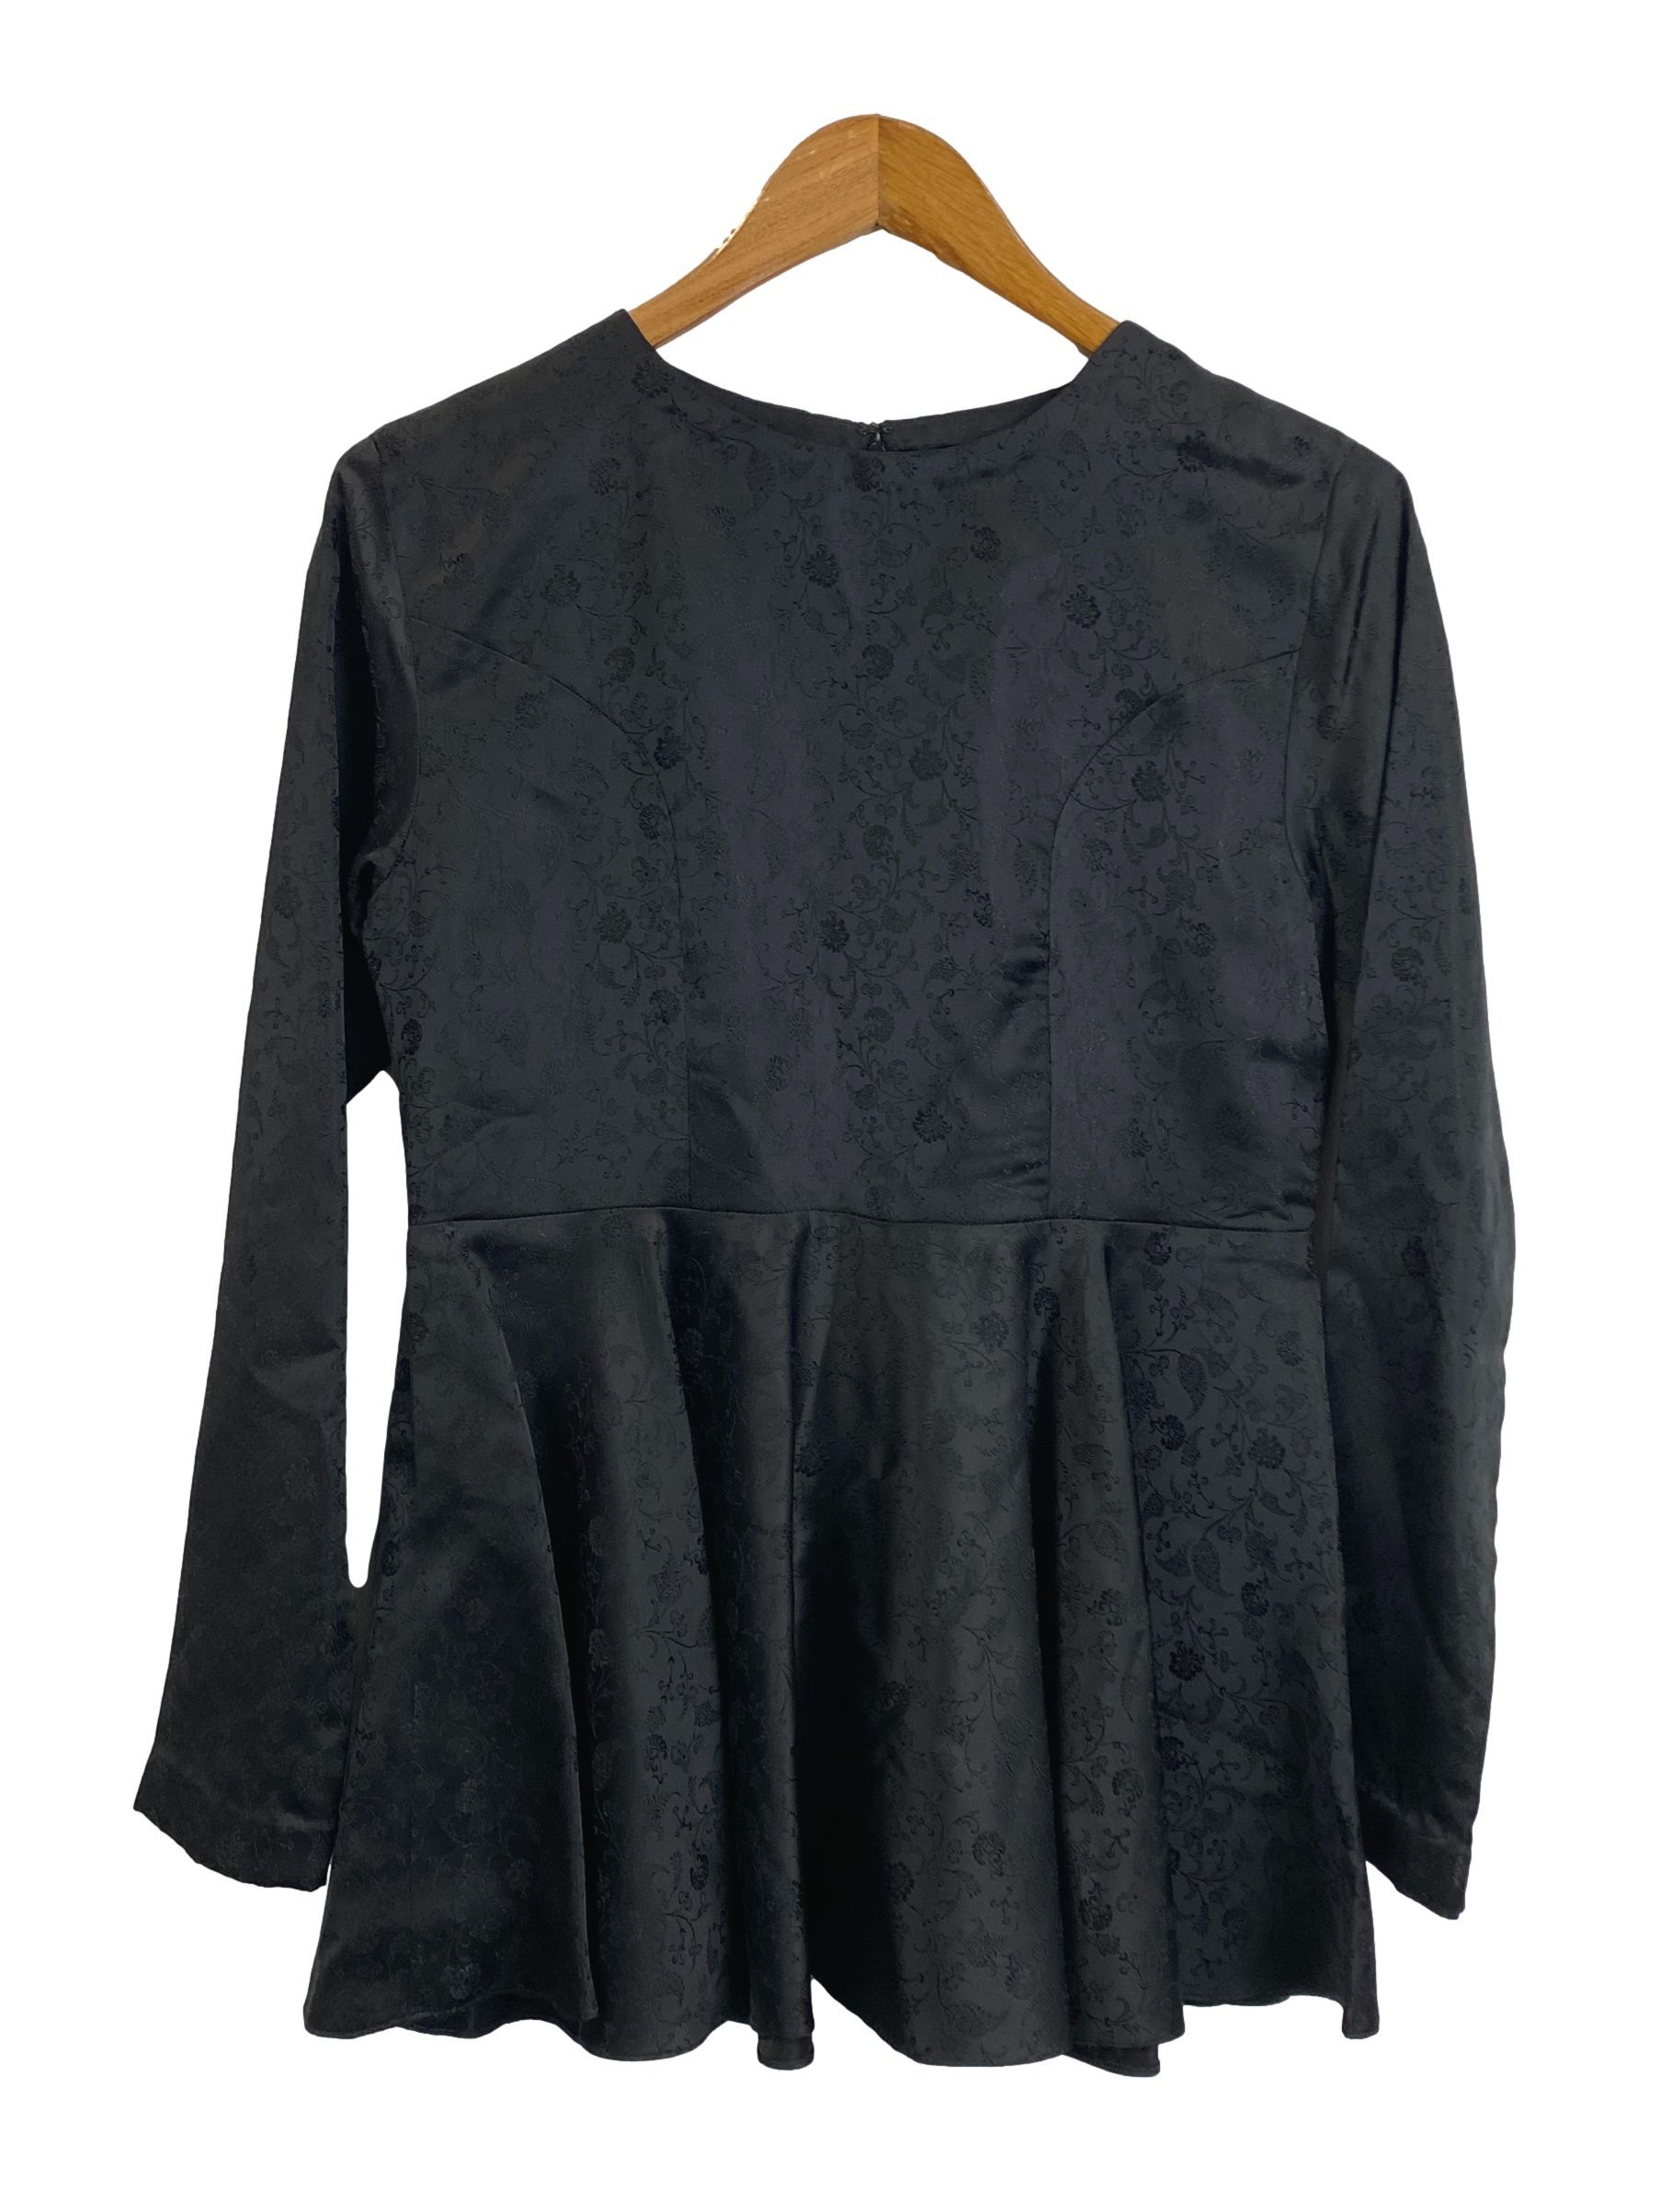 Sable Black Lace Sleeve Top